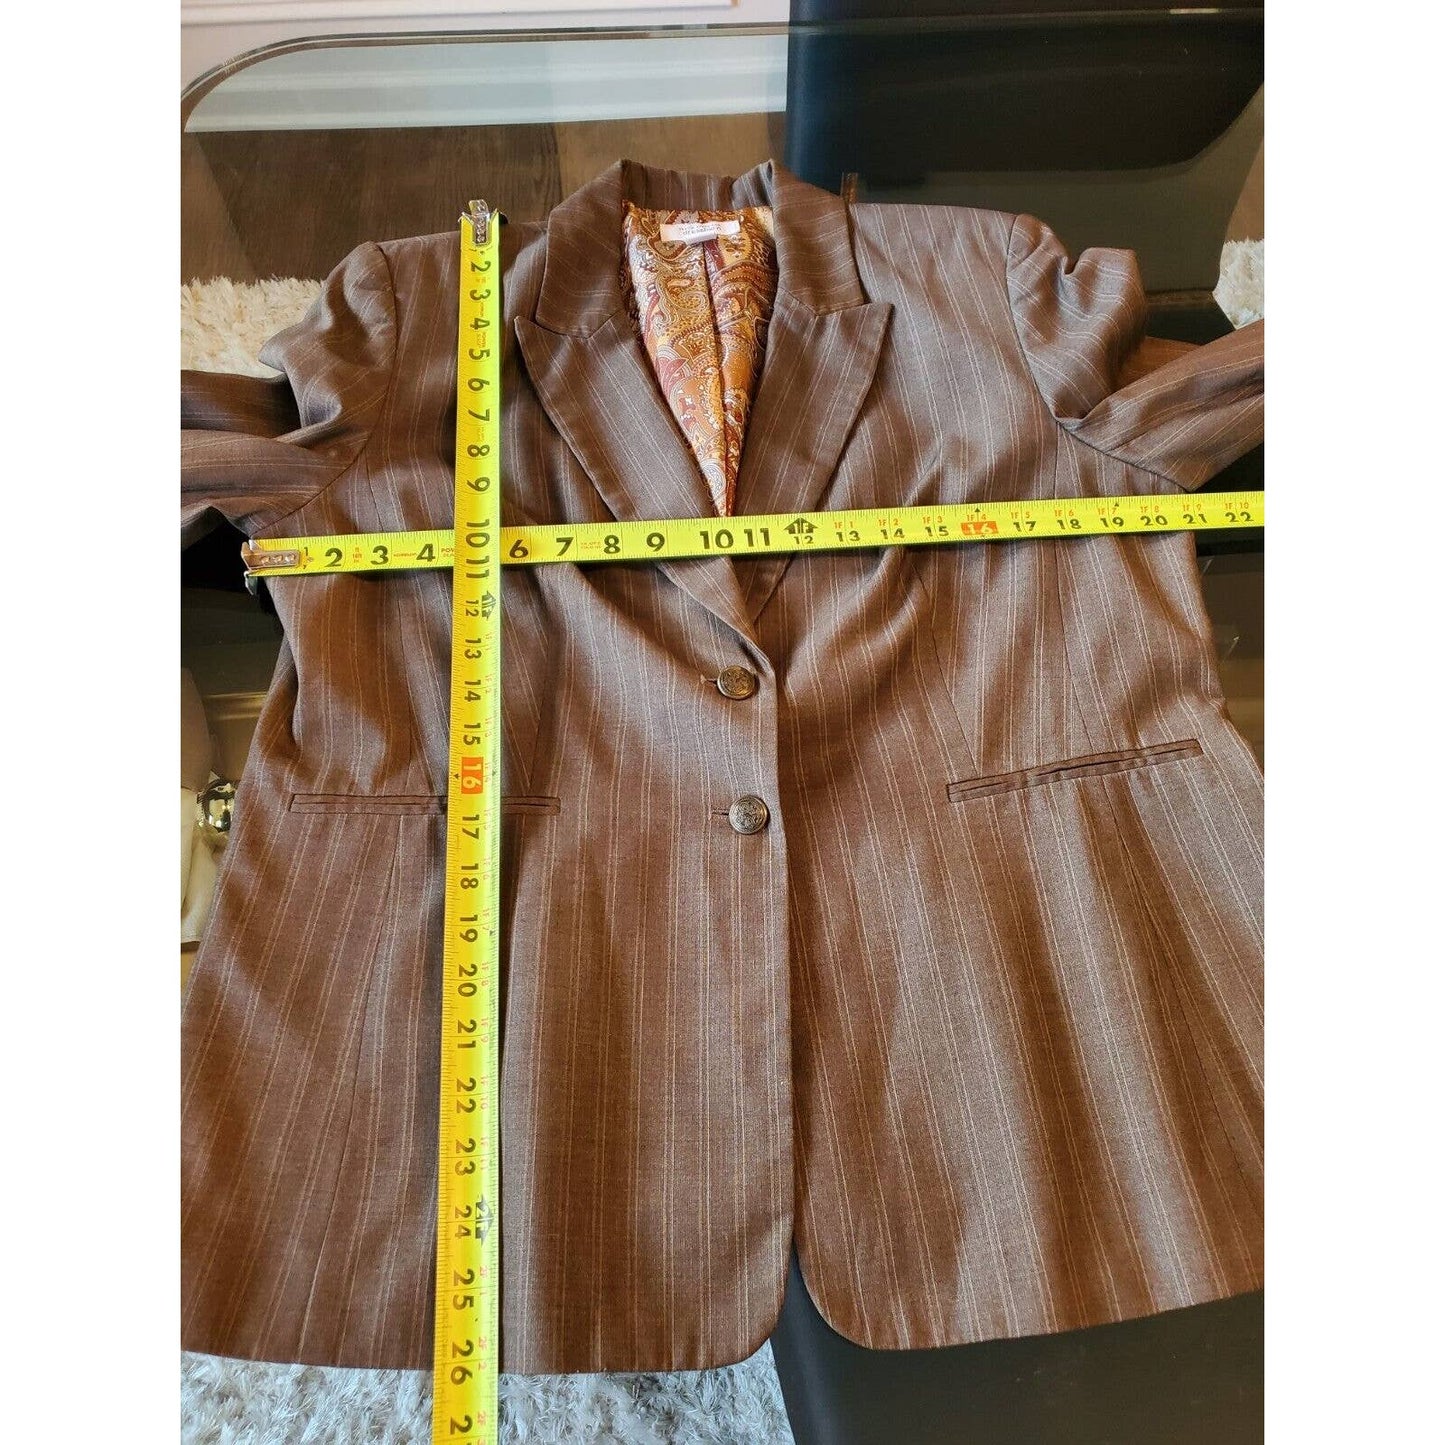 Dressbarn Women's Brown Polyester Single Breasted Blazer & Pant 2 Piece Suit 16